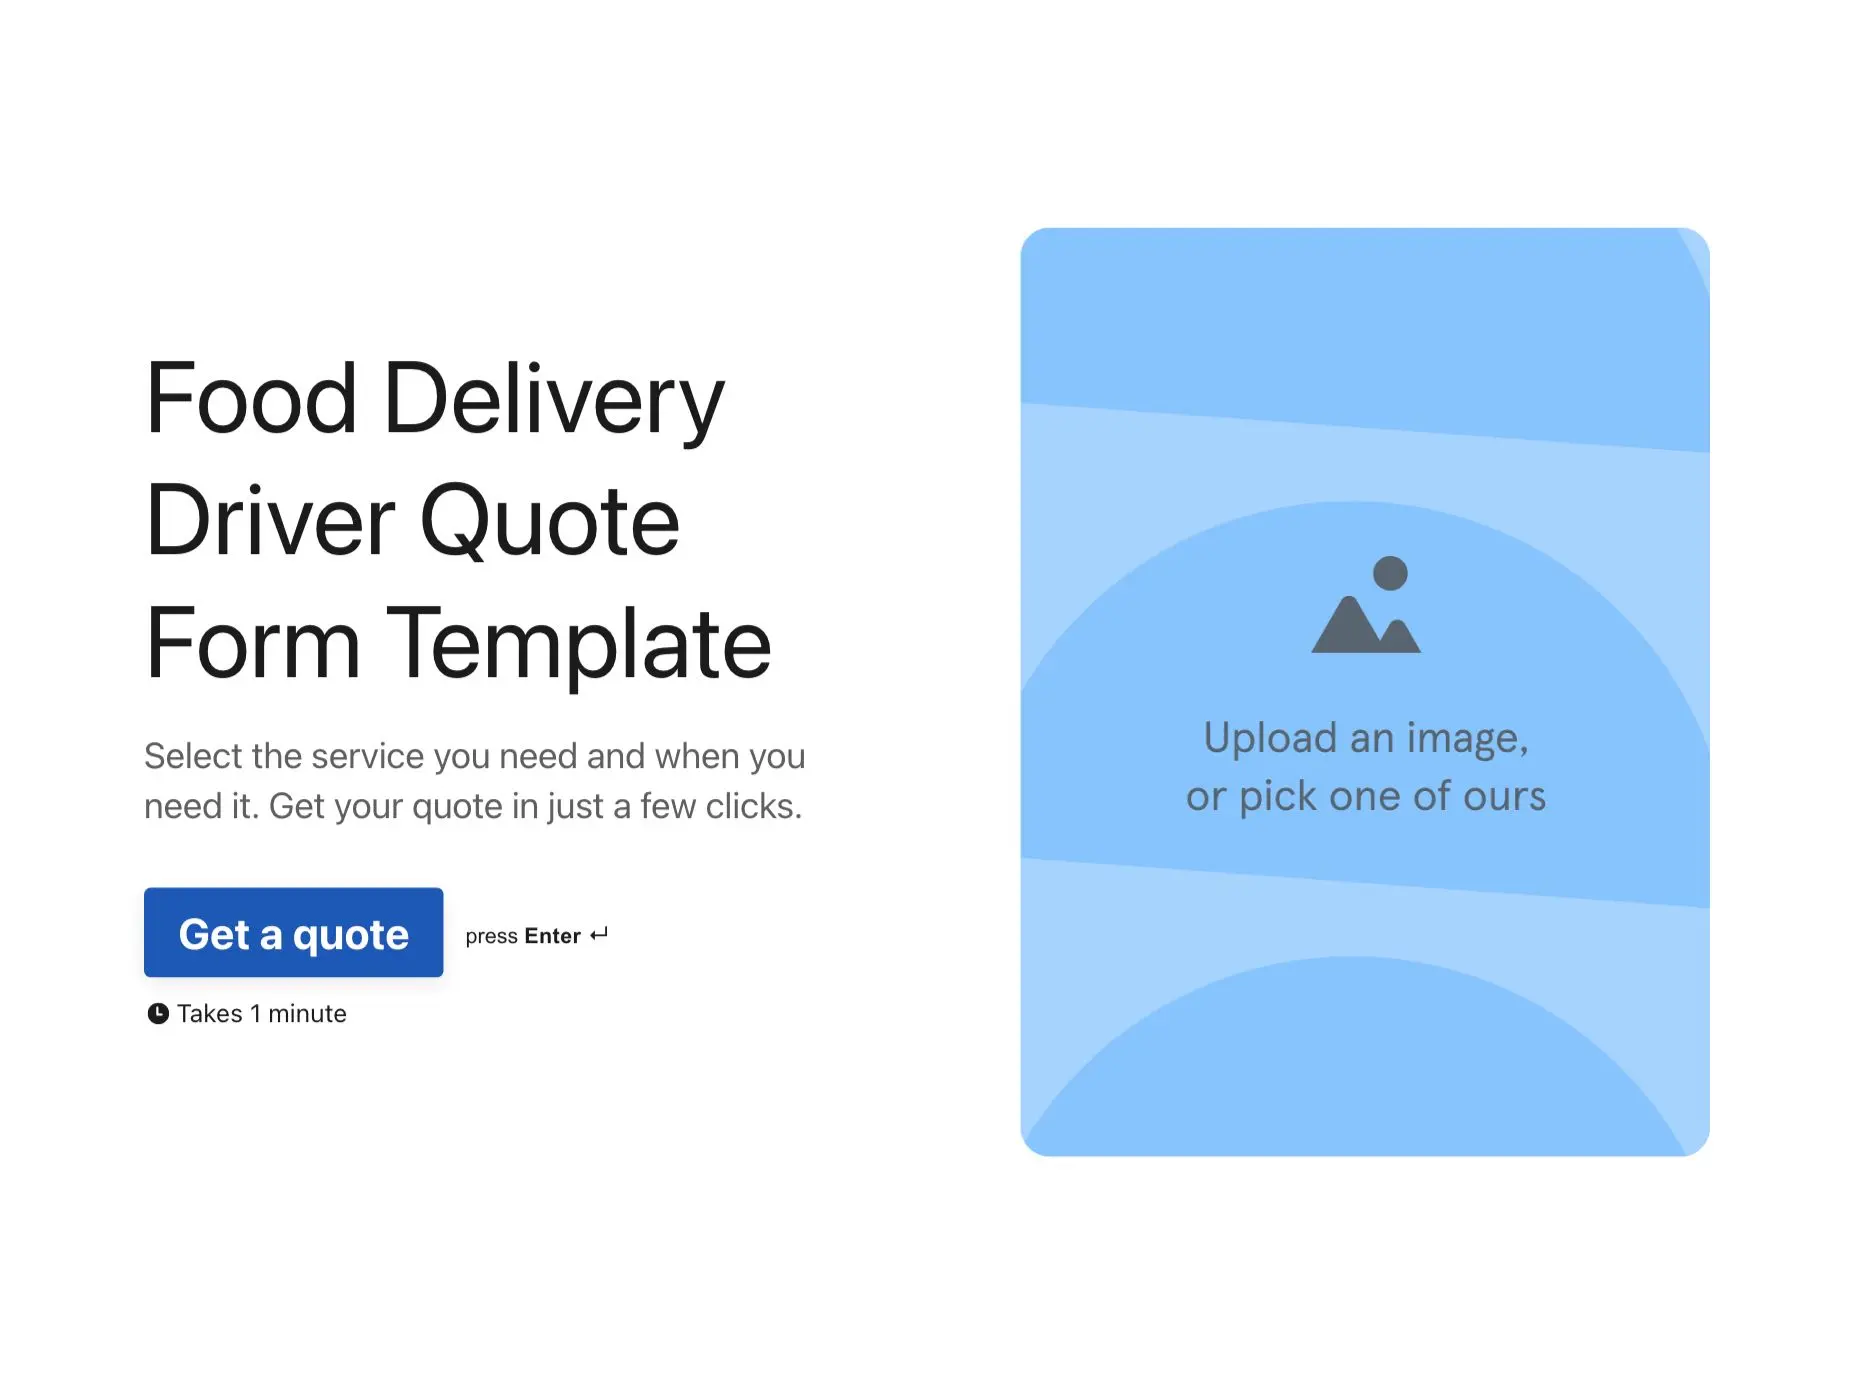 Food Delivery Driver Quote Form Template Hero